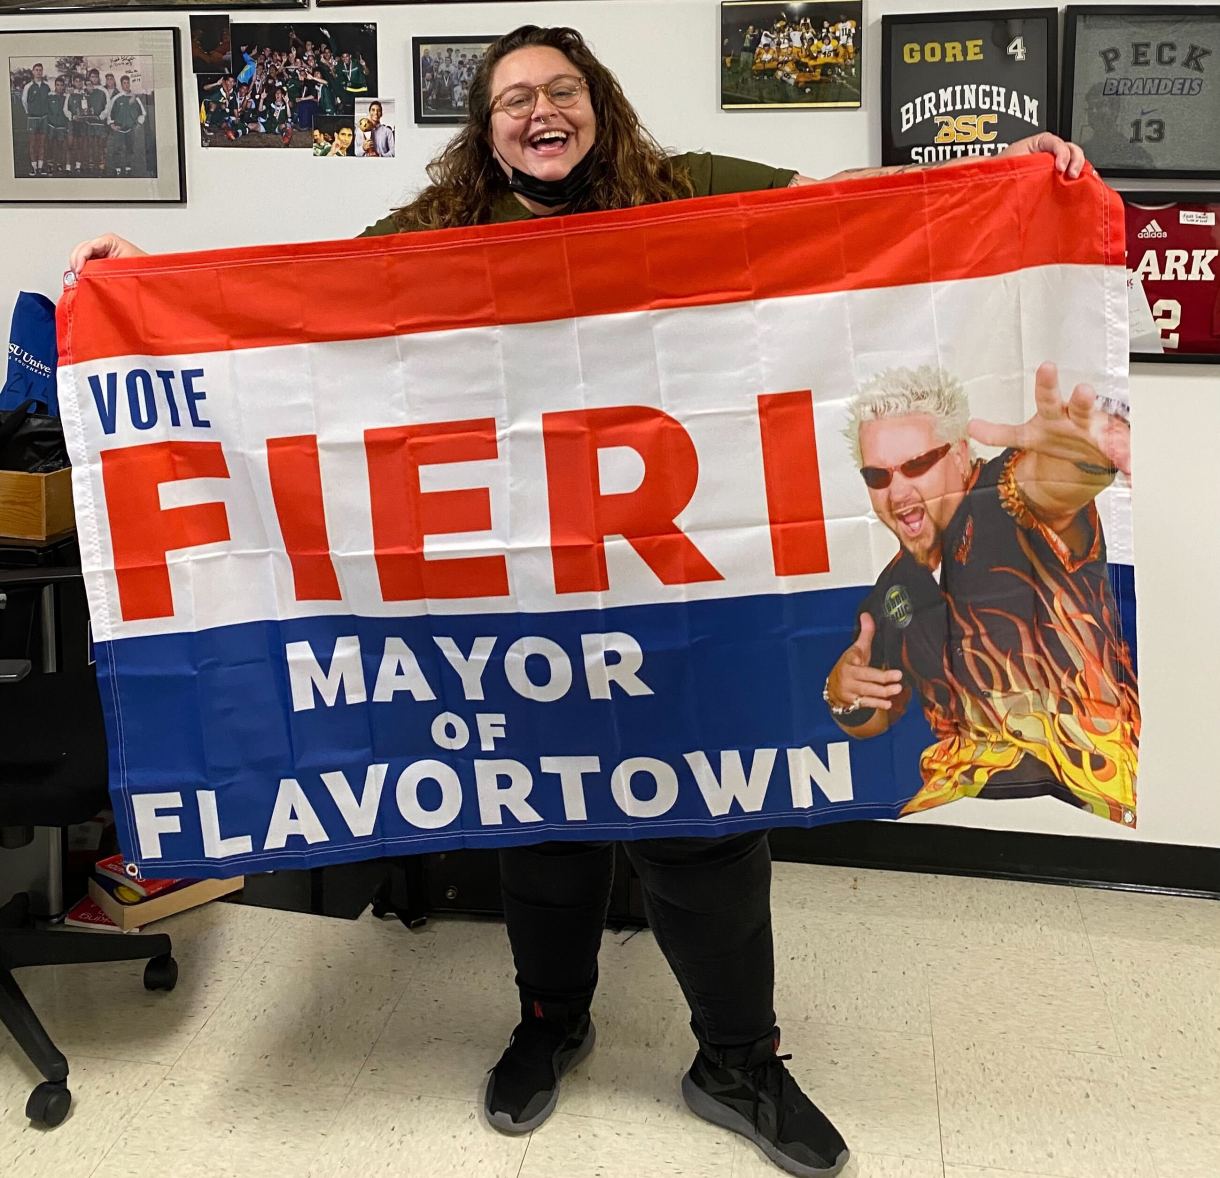 Stef stands, overjoyed, unfurling a giant flag in front of them. The flag is a Vote Fiere Mayor of Flavortown flag with huge, bold, text in red white and blue. Guy Fieri is on it in his signature exuberant pose, bleached hair and firey shirt. Stef is a white person with glasses and long brown hair who in this photo is largely obscured by this huge flag.